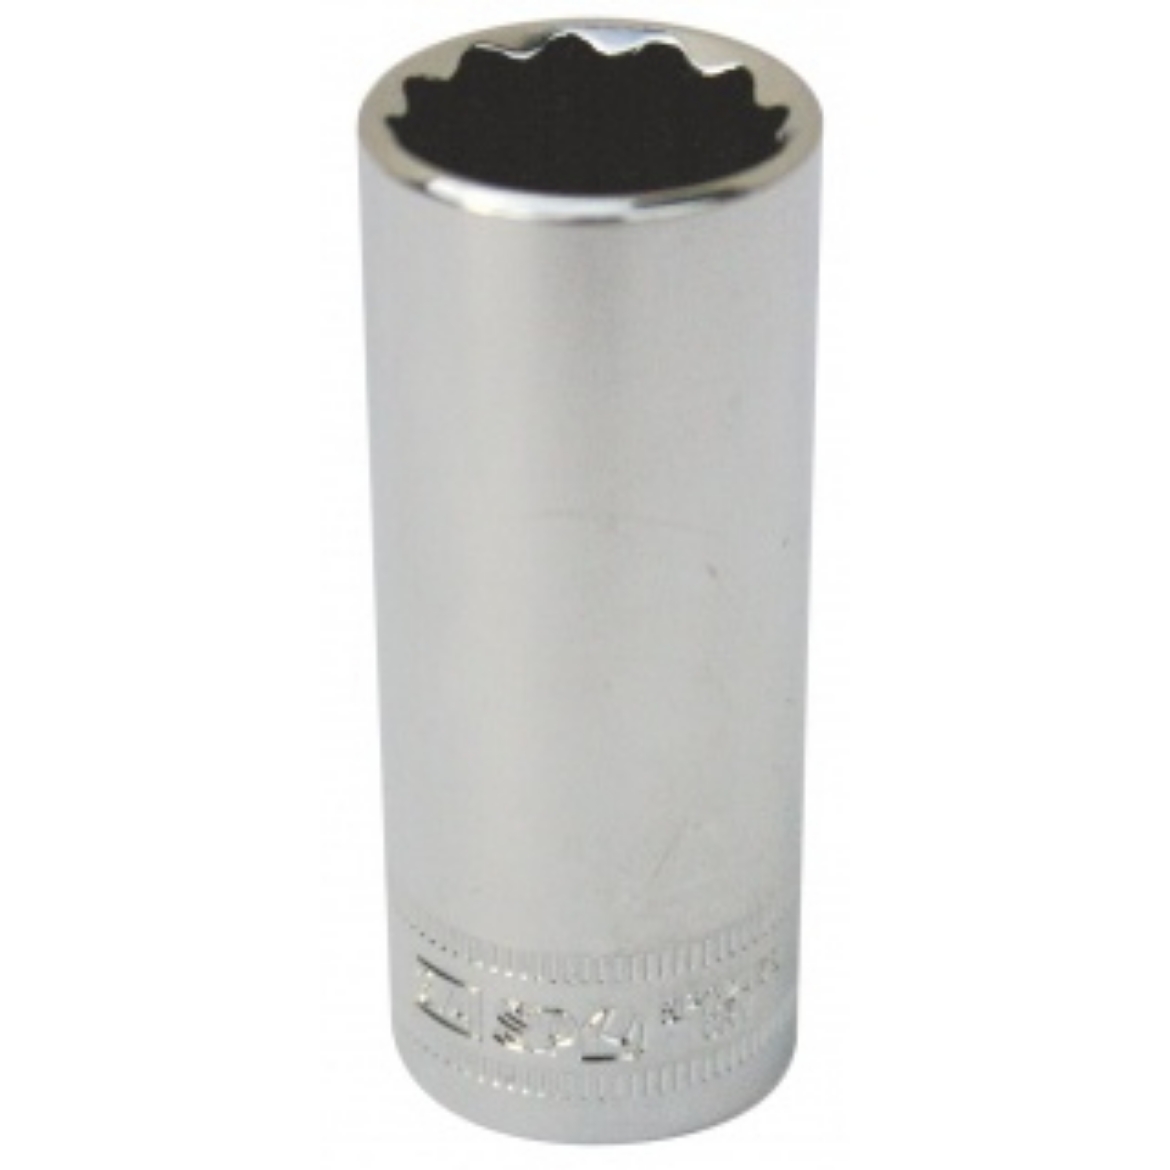 Picture of SOCKET DEEP 3/8"DR 12PT METRIC 12MM SP TOOLS